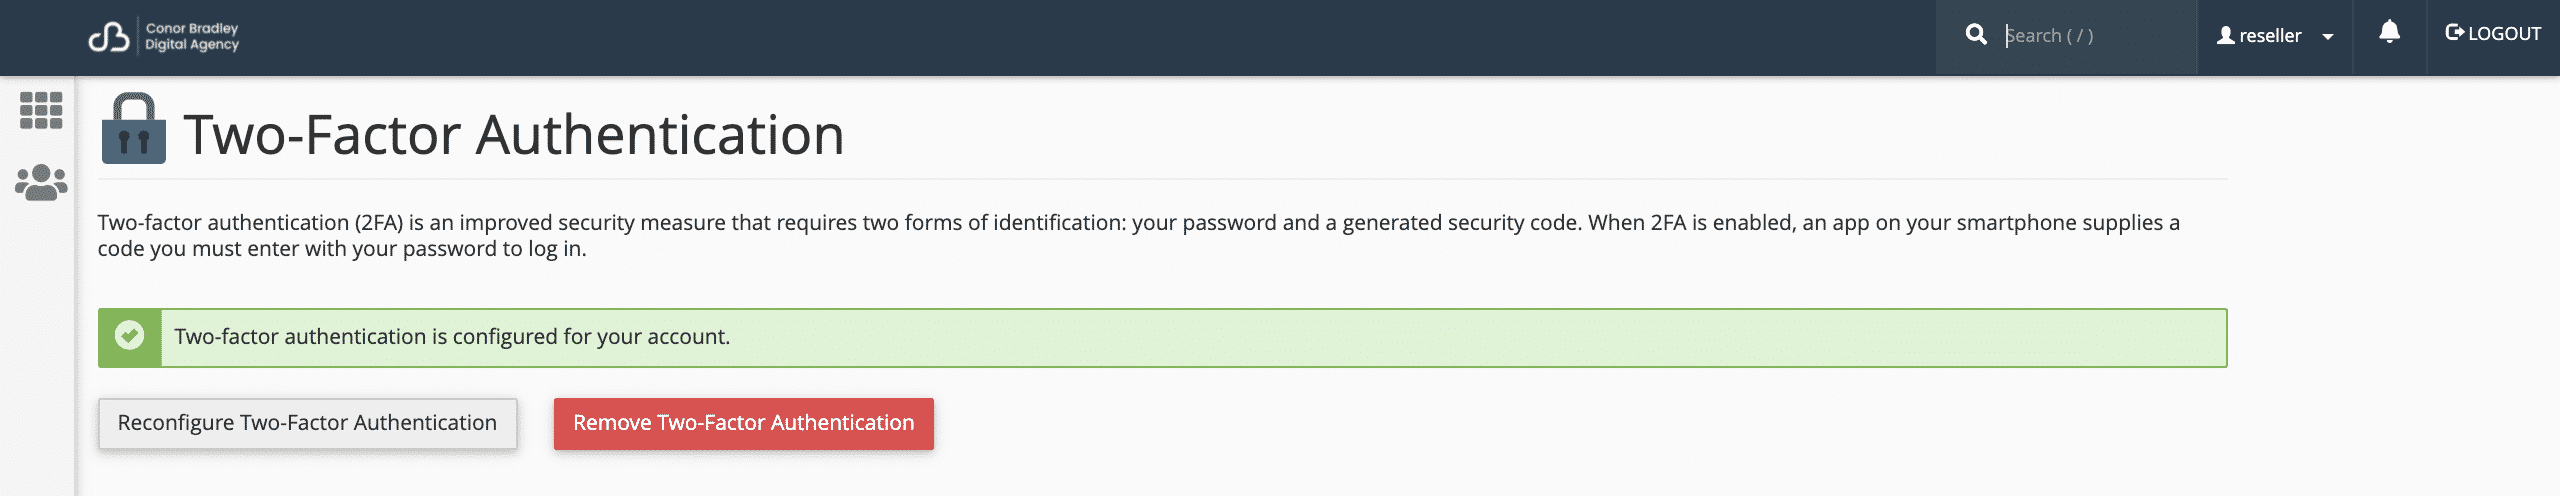 Removing two factor authentication in cpanel conor bradley digital agency